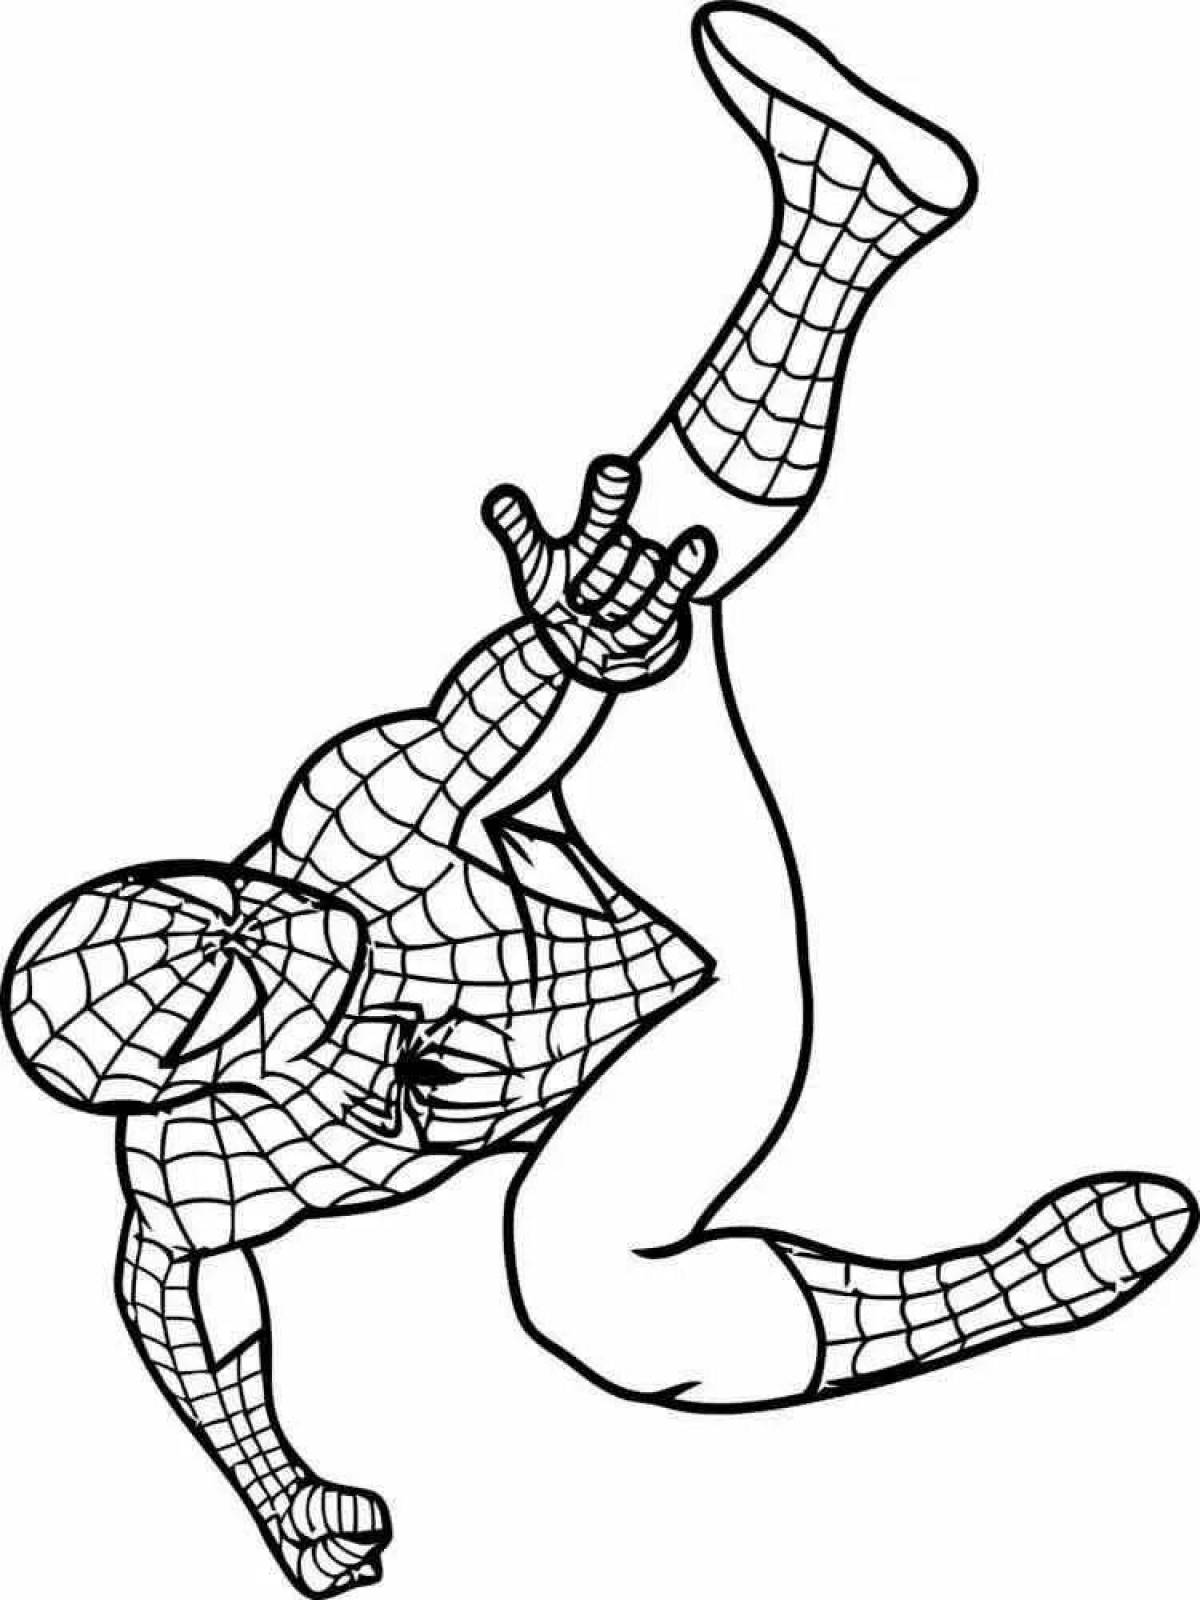 Spider-Man Joyful Coloring Book for 5 year olds